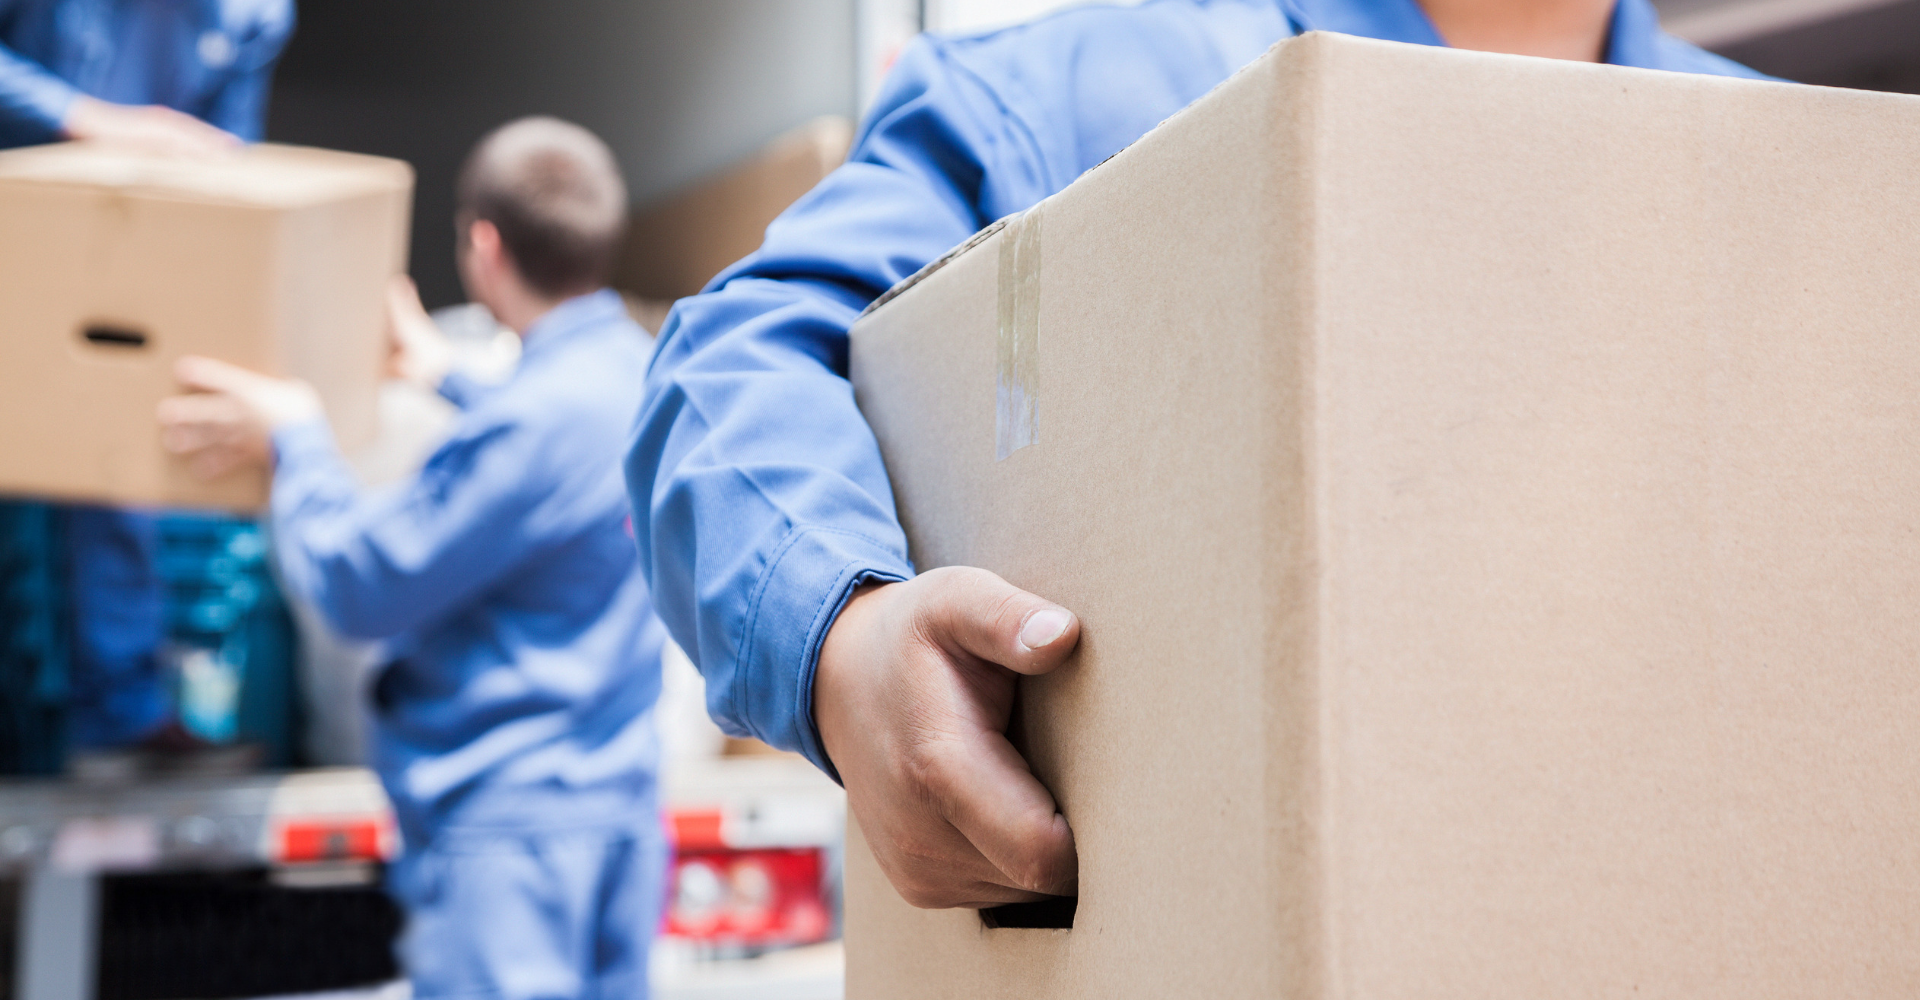 Packing and Unpacking - Best Packing Tips for Moving Day - Movers carrying boxes